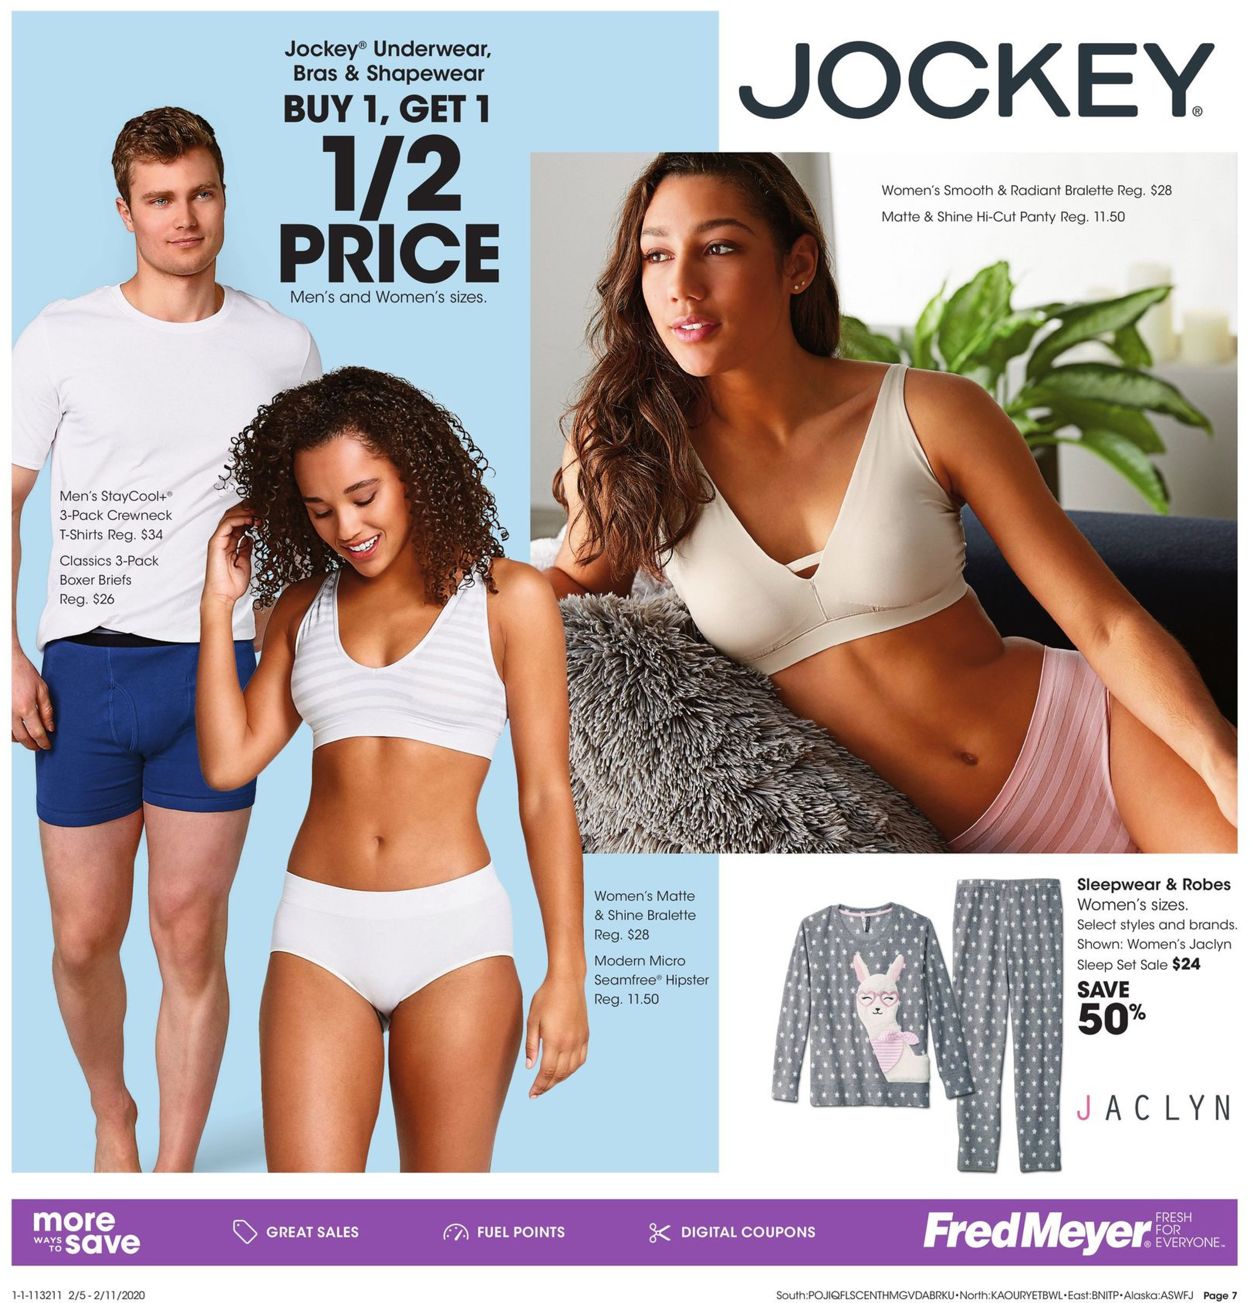 Fred Meyer Weekly Ad Circular - valid 02/05-02/11/2020 (Page 7)